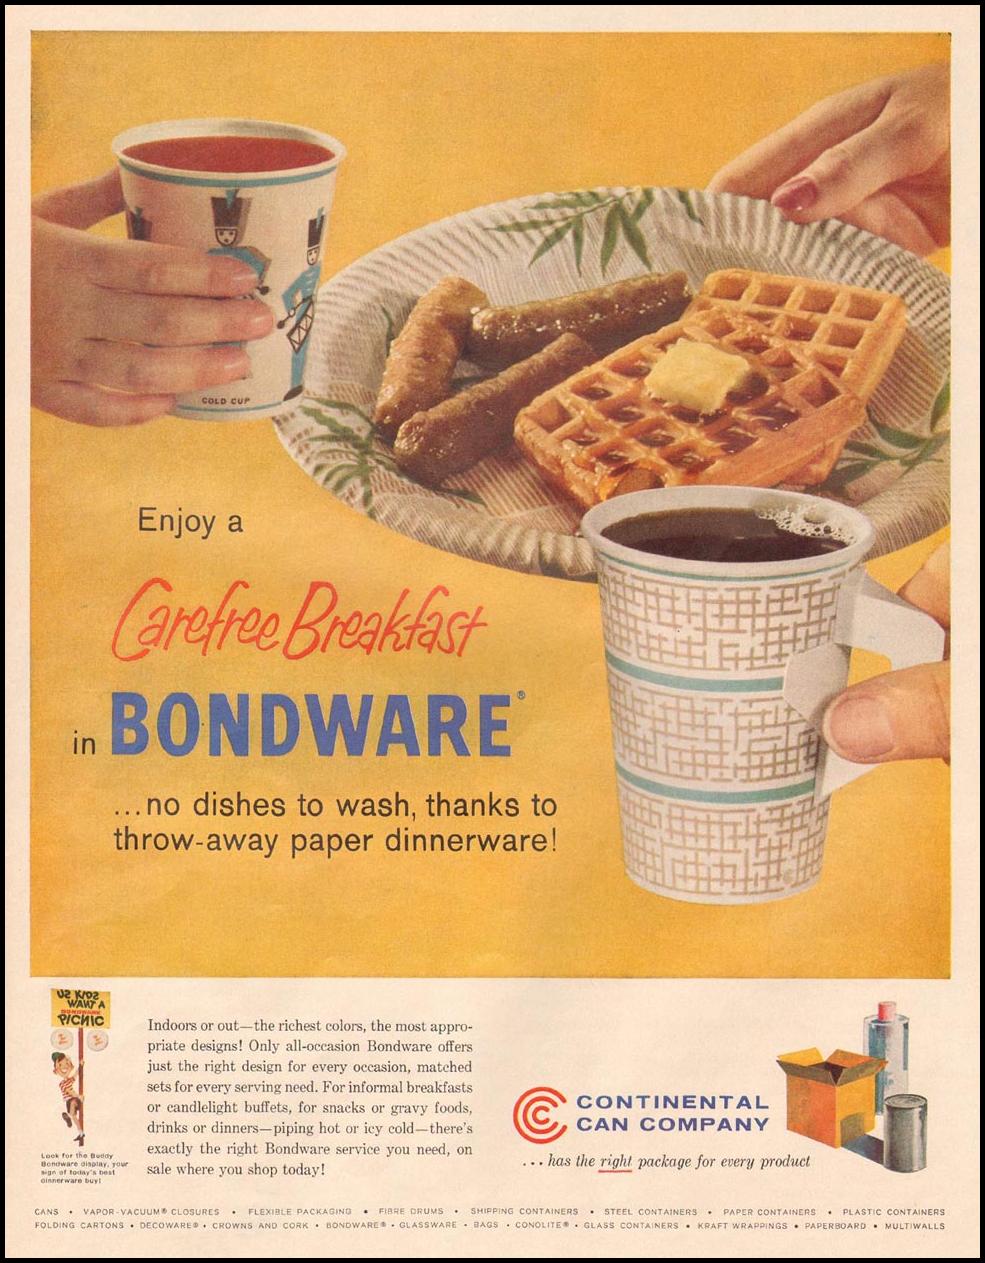 BONDWARE PAPER PLATES AND CUPS
LIFE
08/10/1958